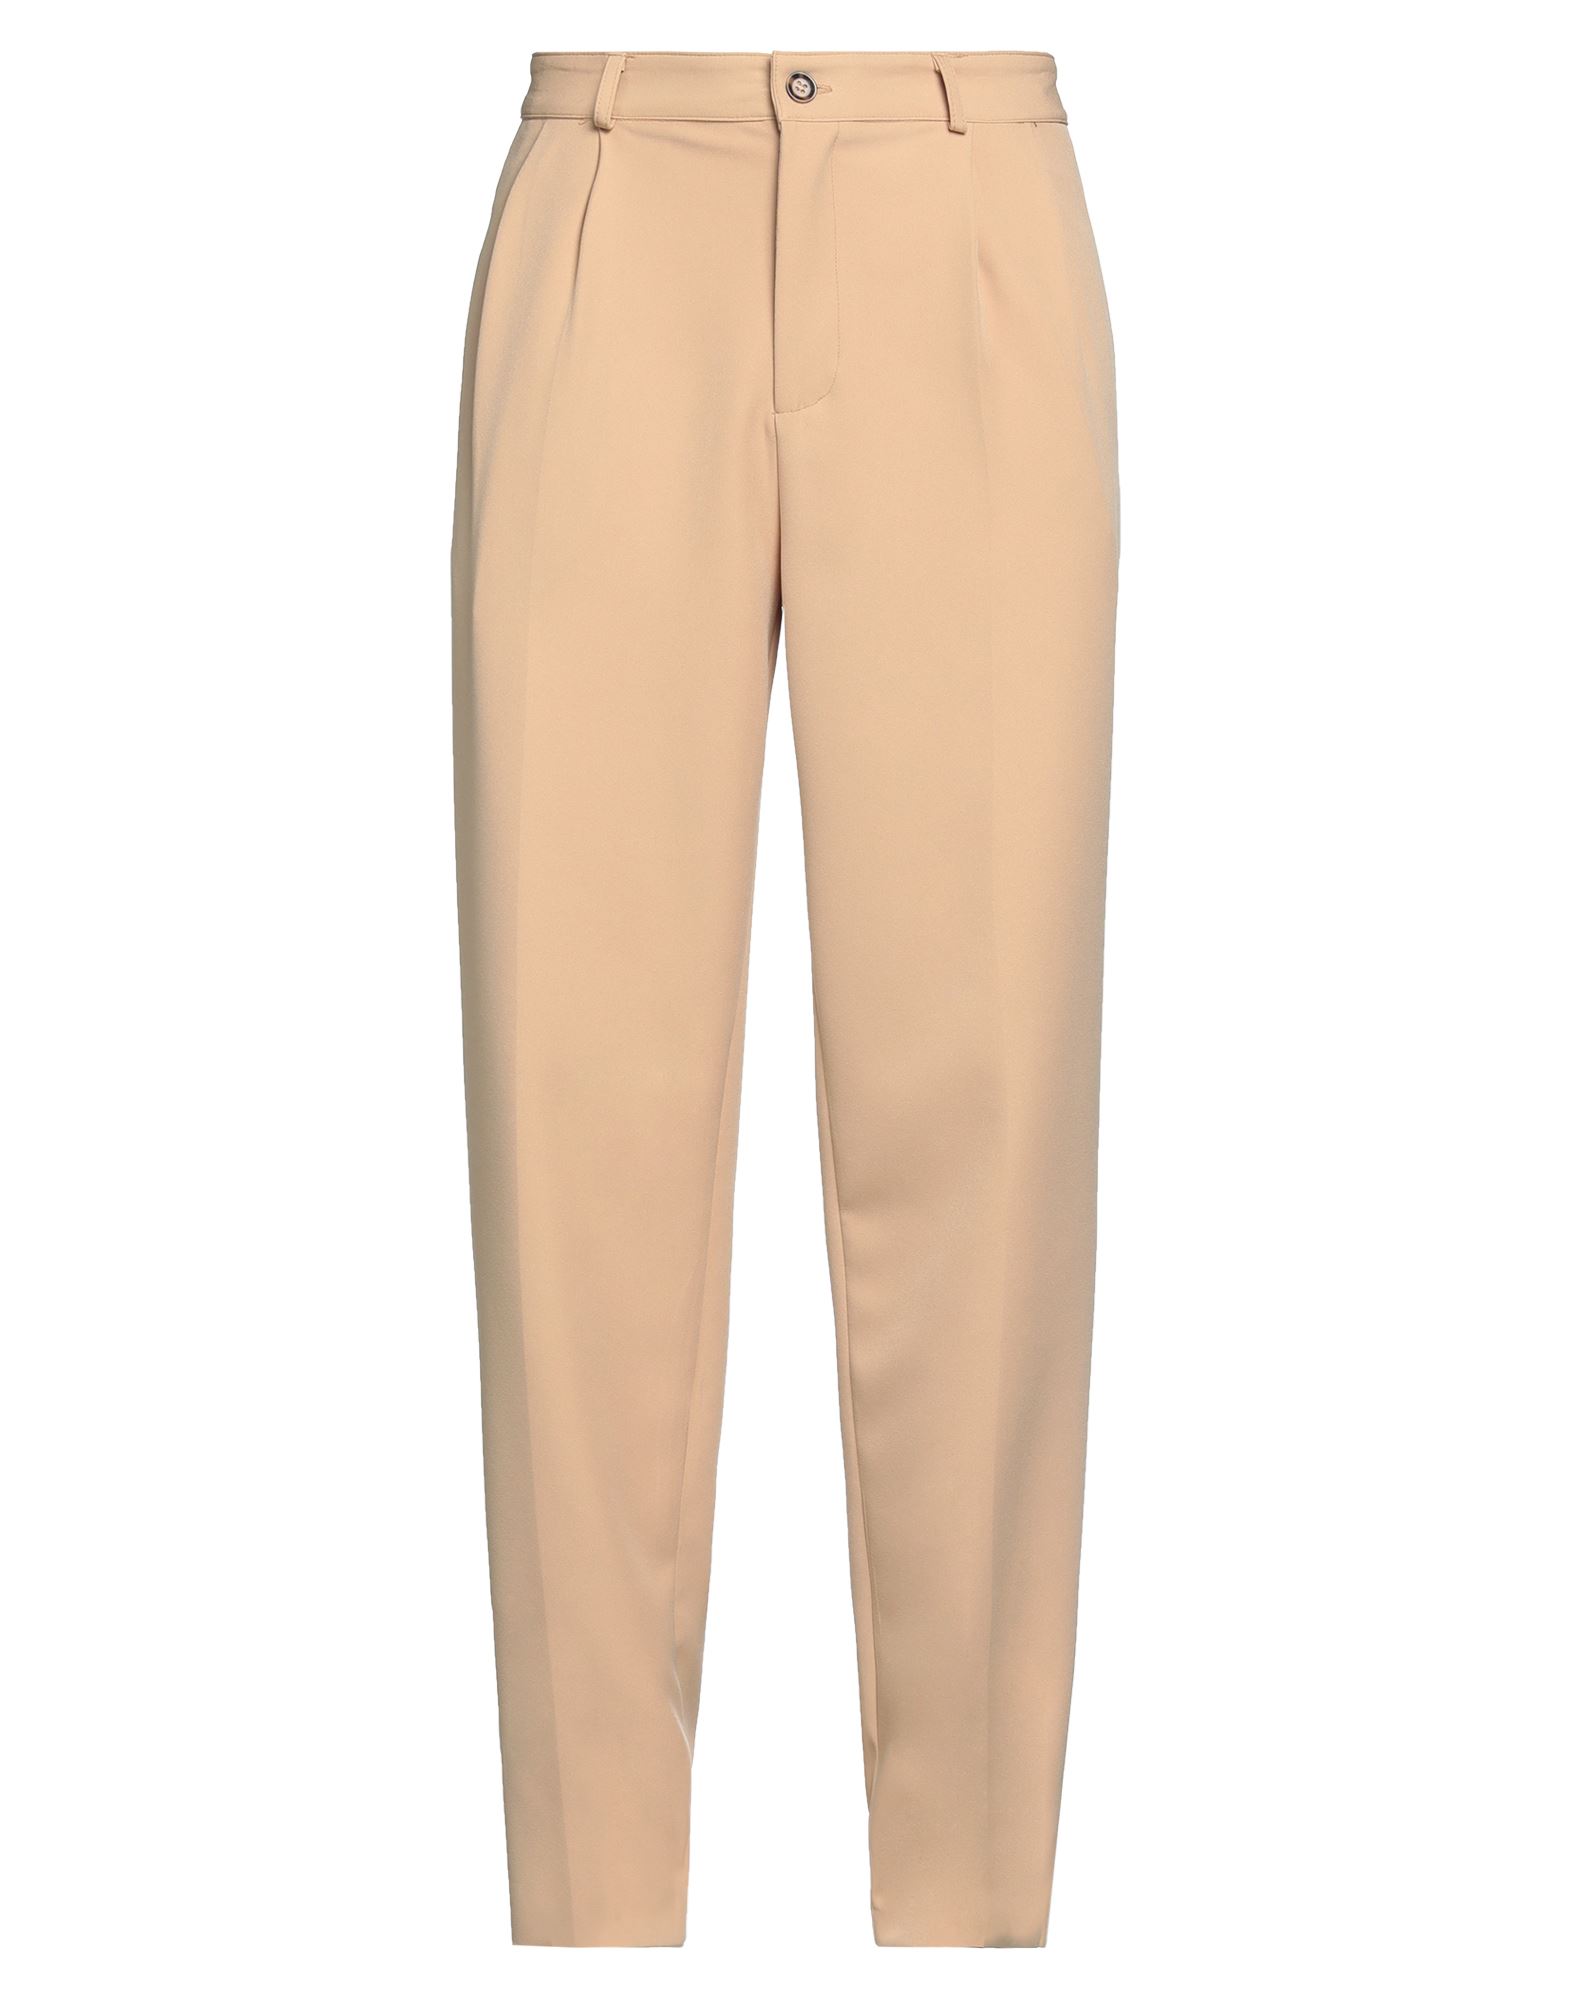 The Future Pants In Beige